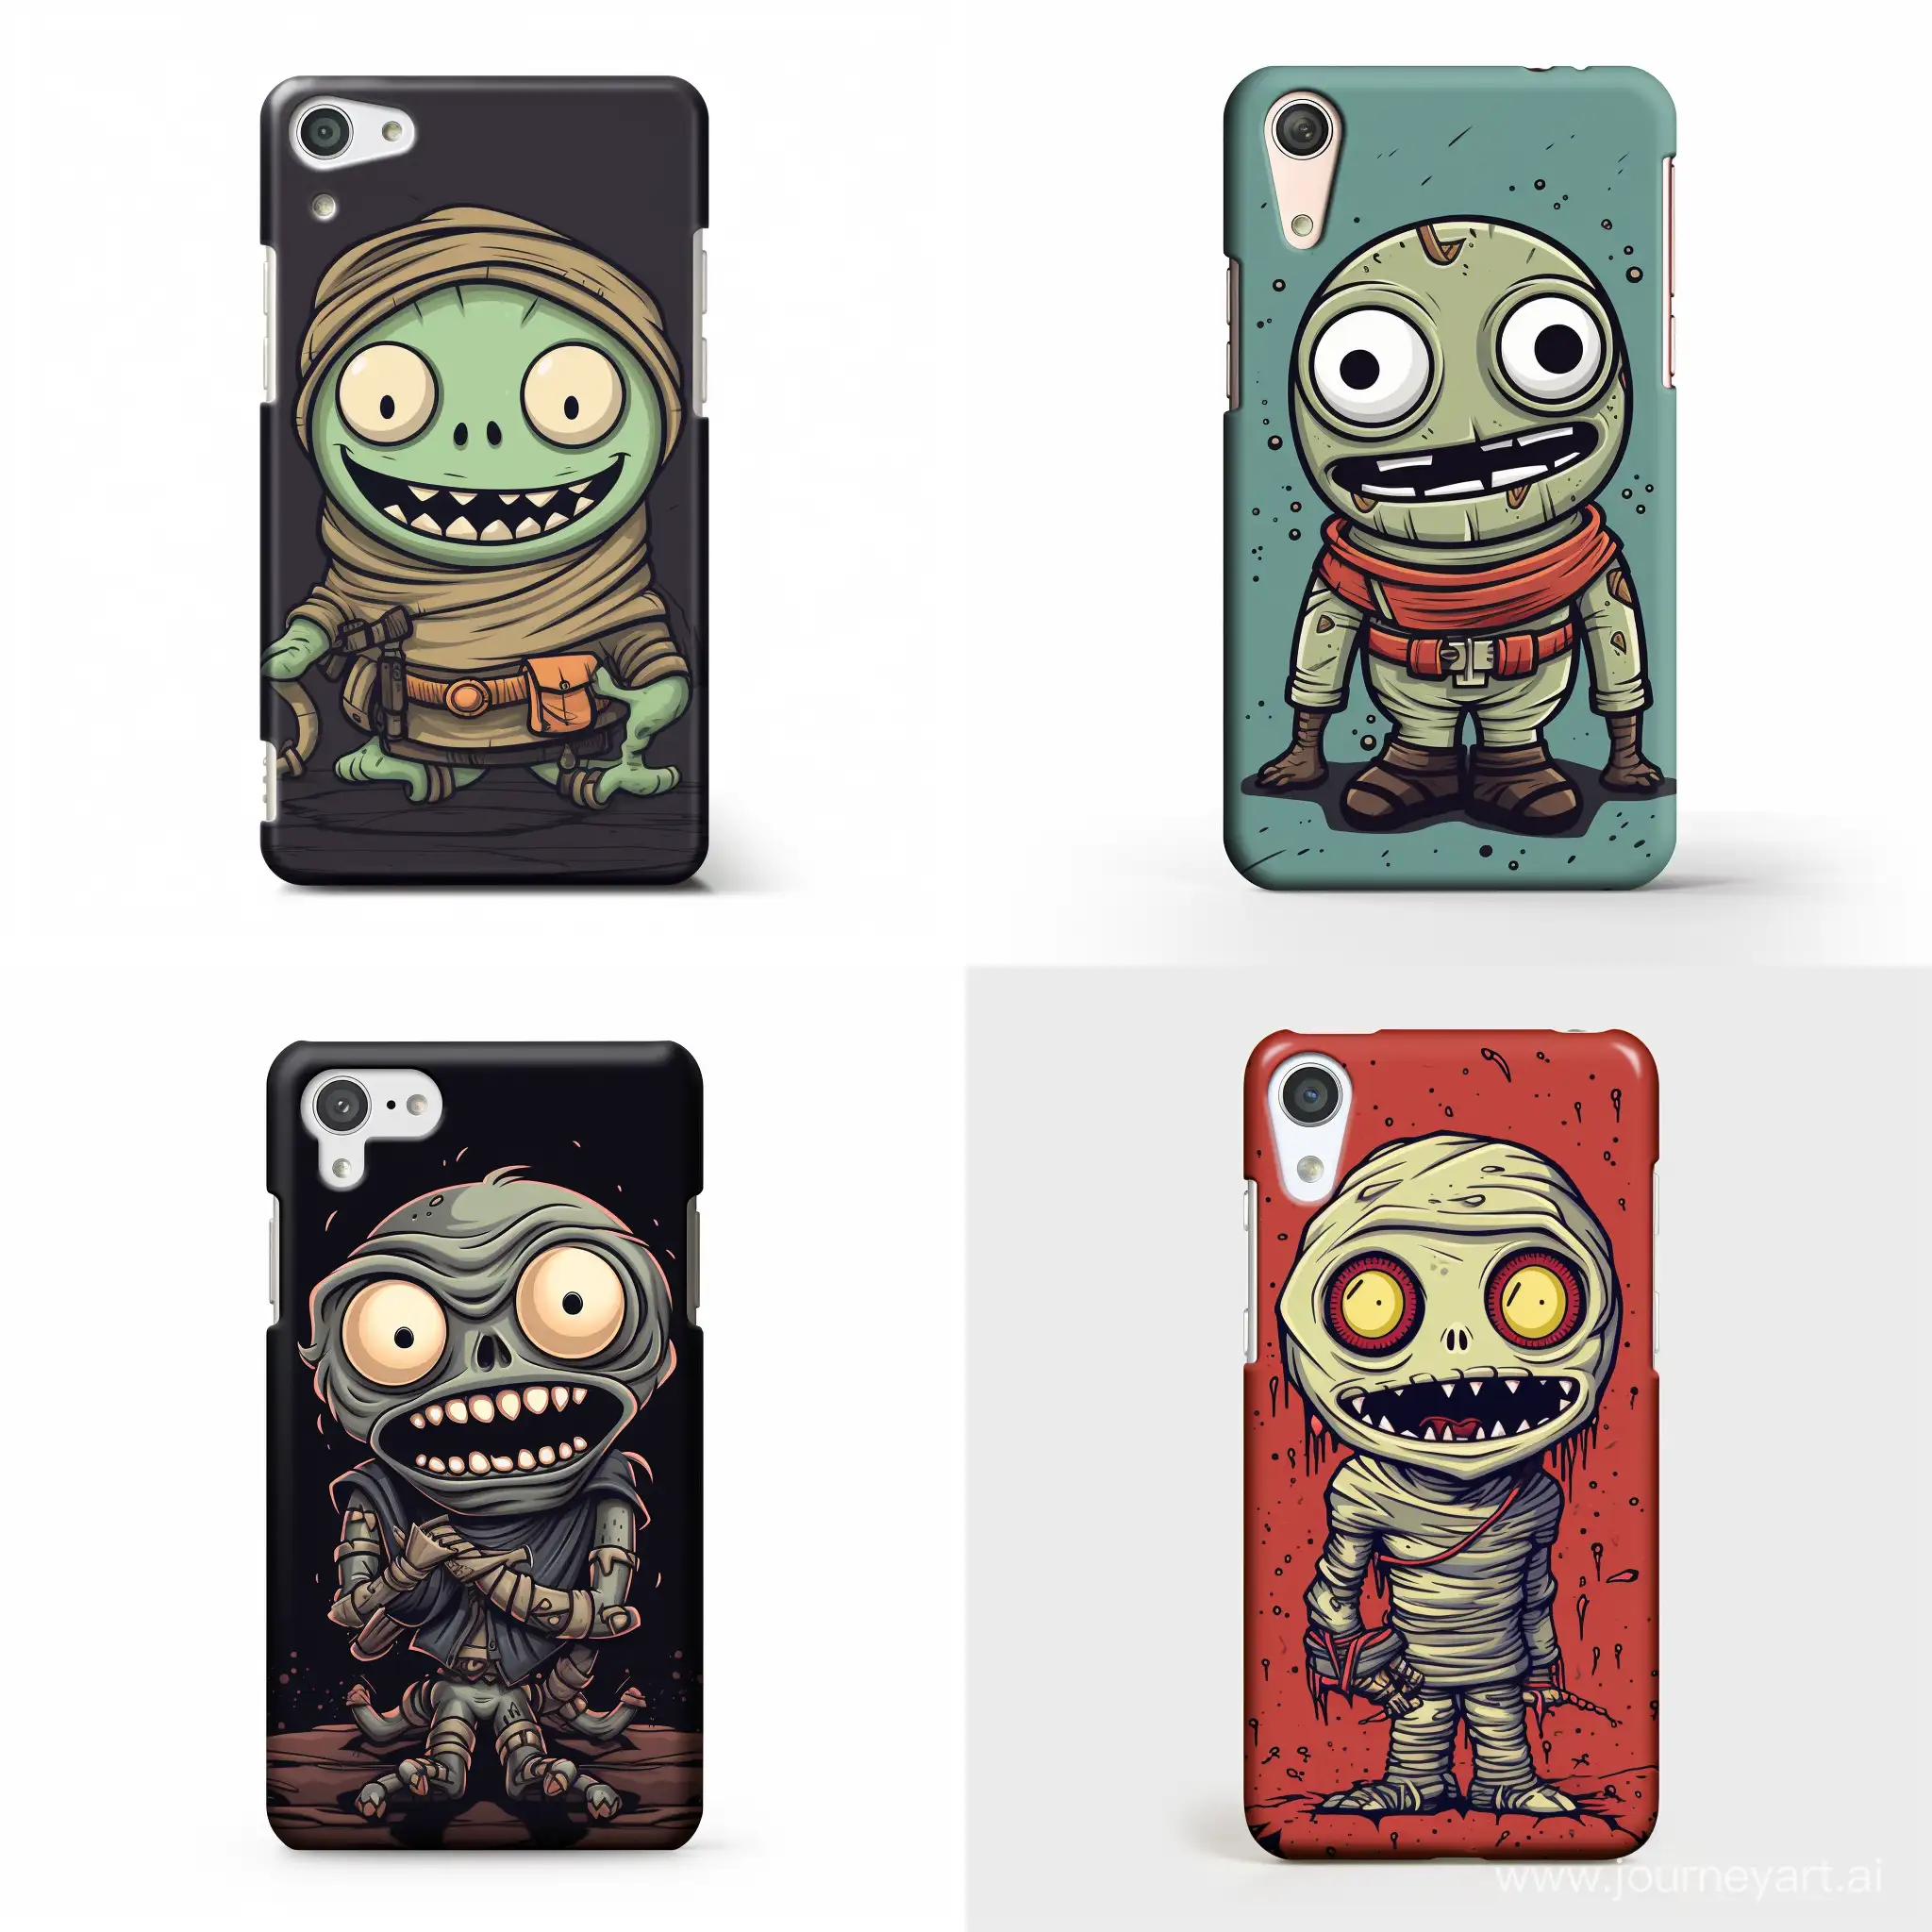 Adorable-Mummy-Cartoon-Mobile-Case-Perfectly-Square-Design